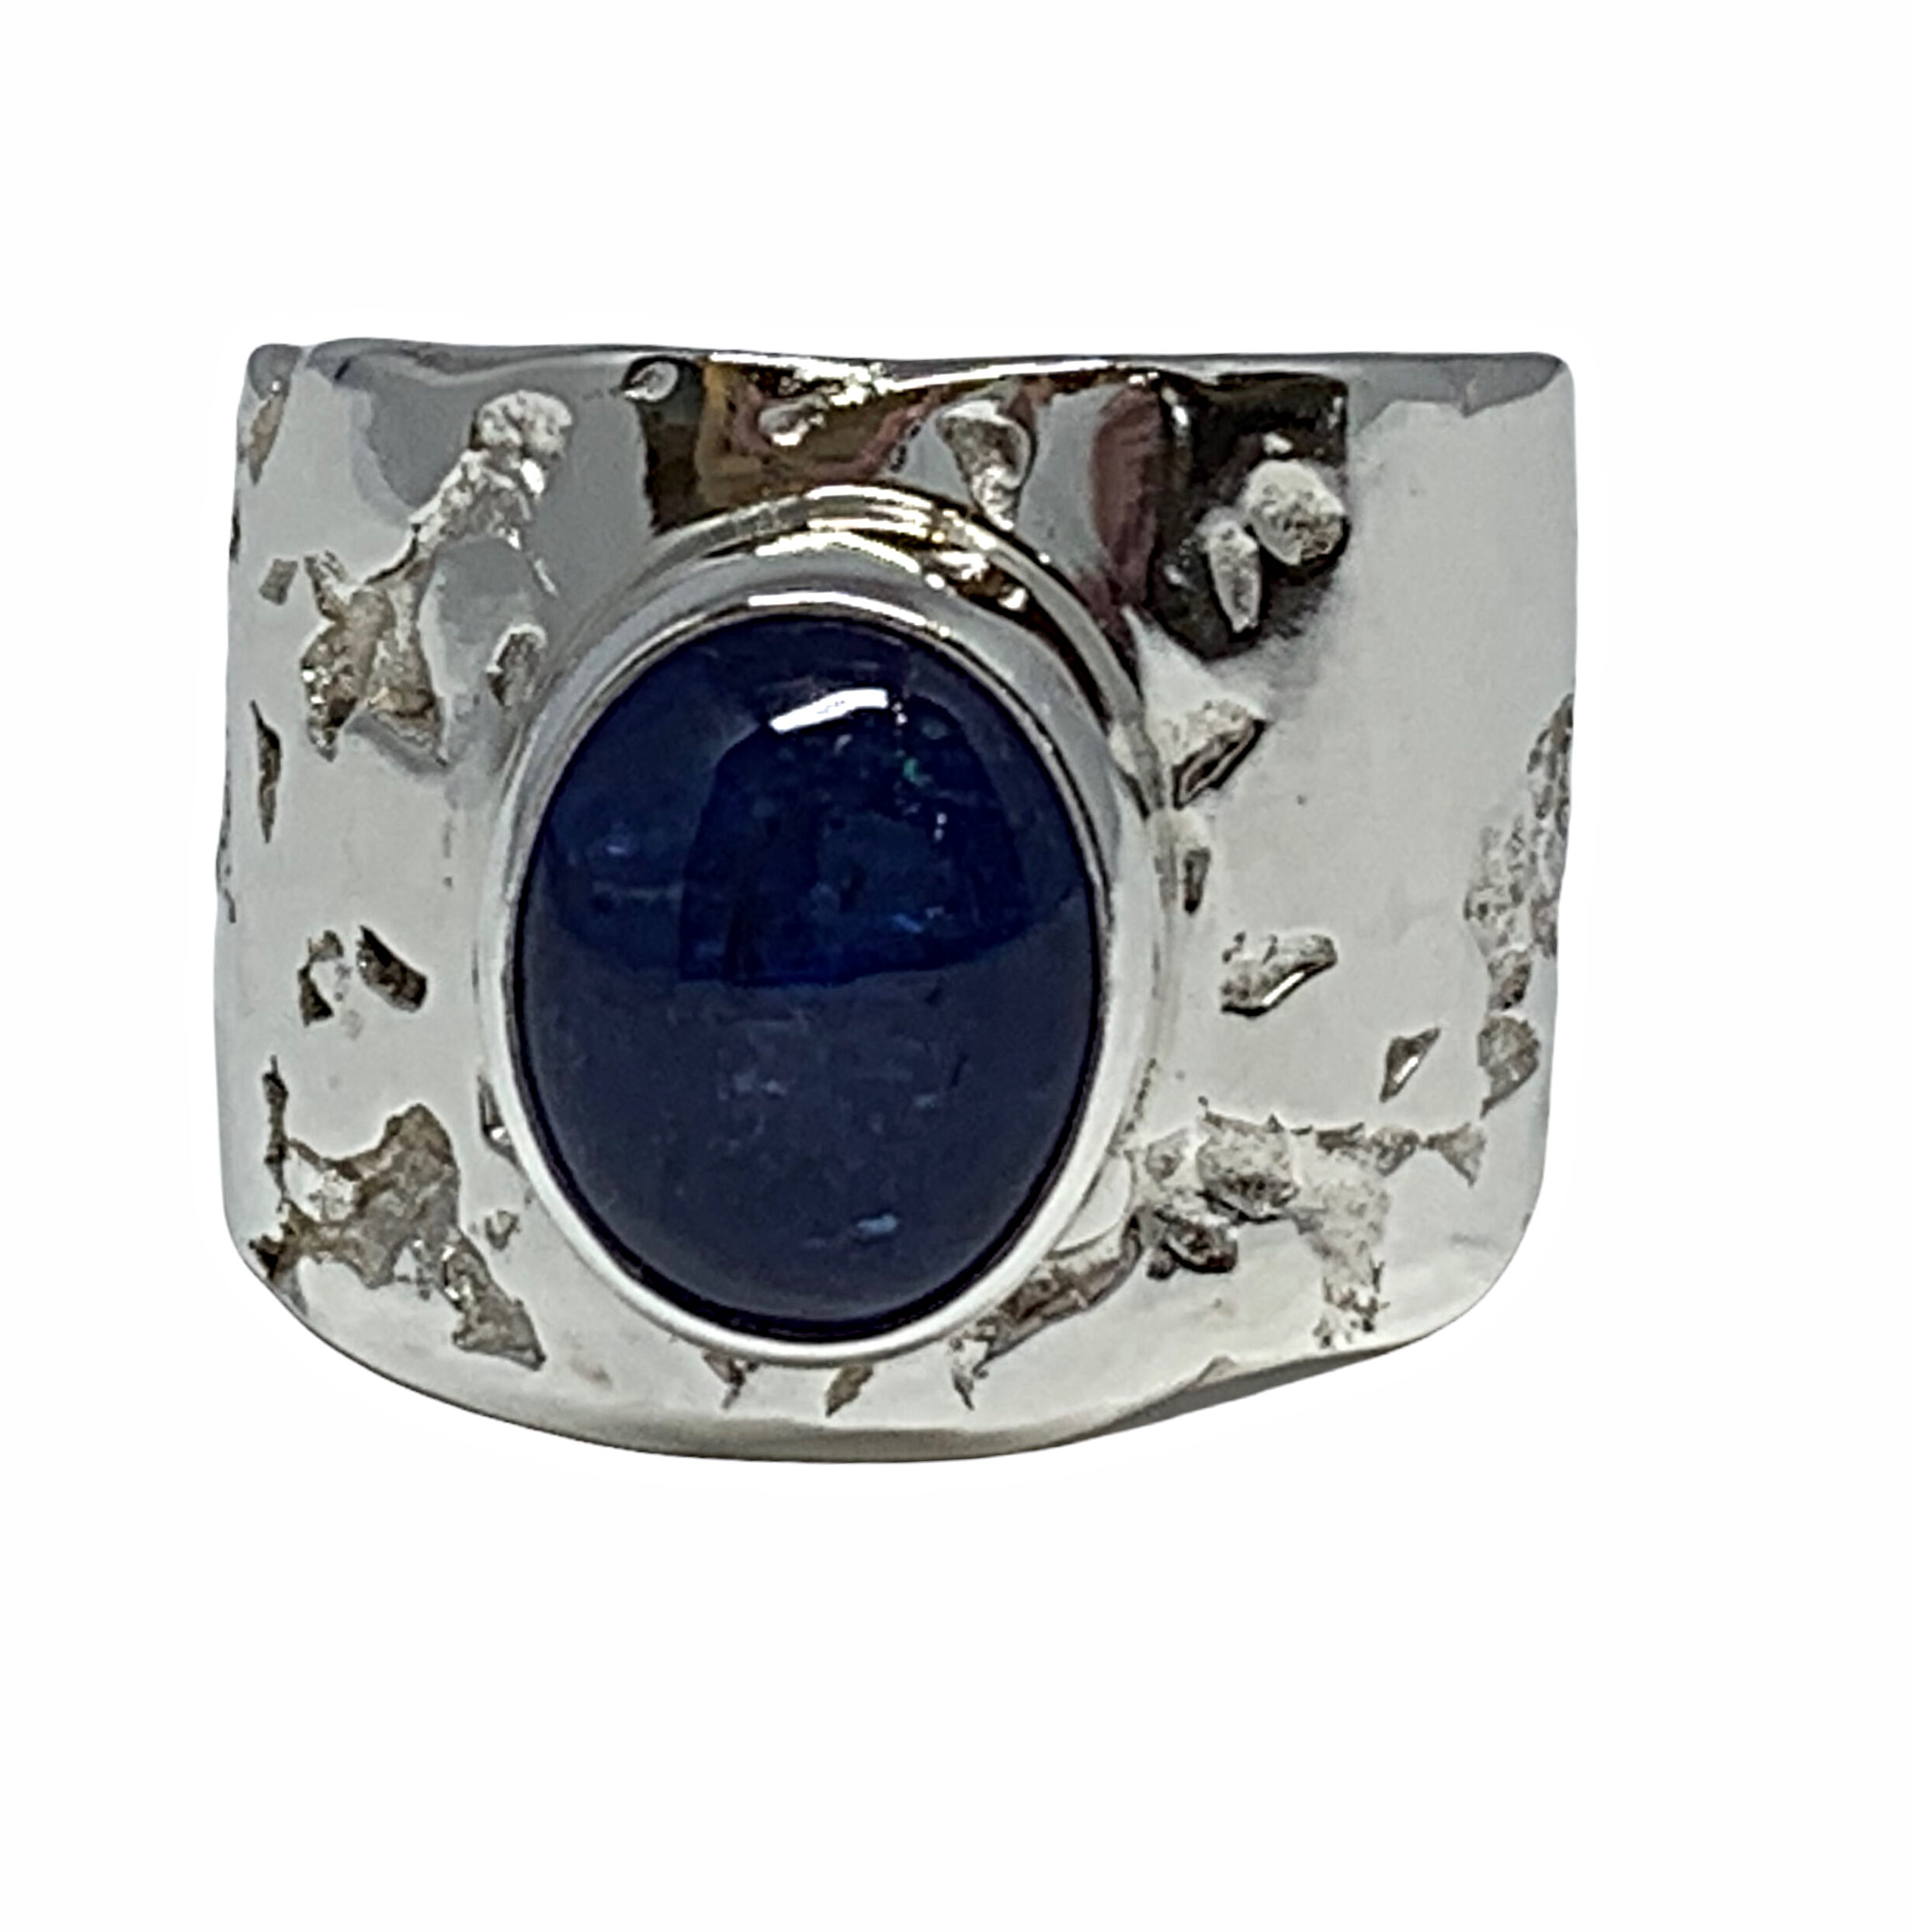 Sterling silver and tanzanite ring by A&R Jewellery | Effusion Art Gallery + Cast Glass Studio, Invermere BC